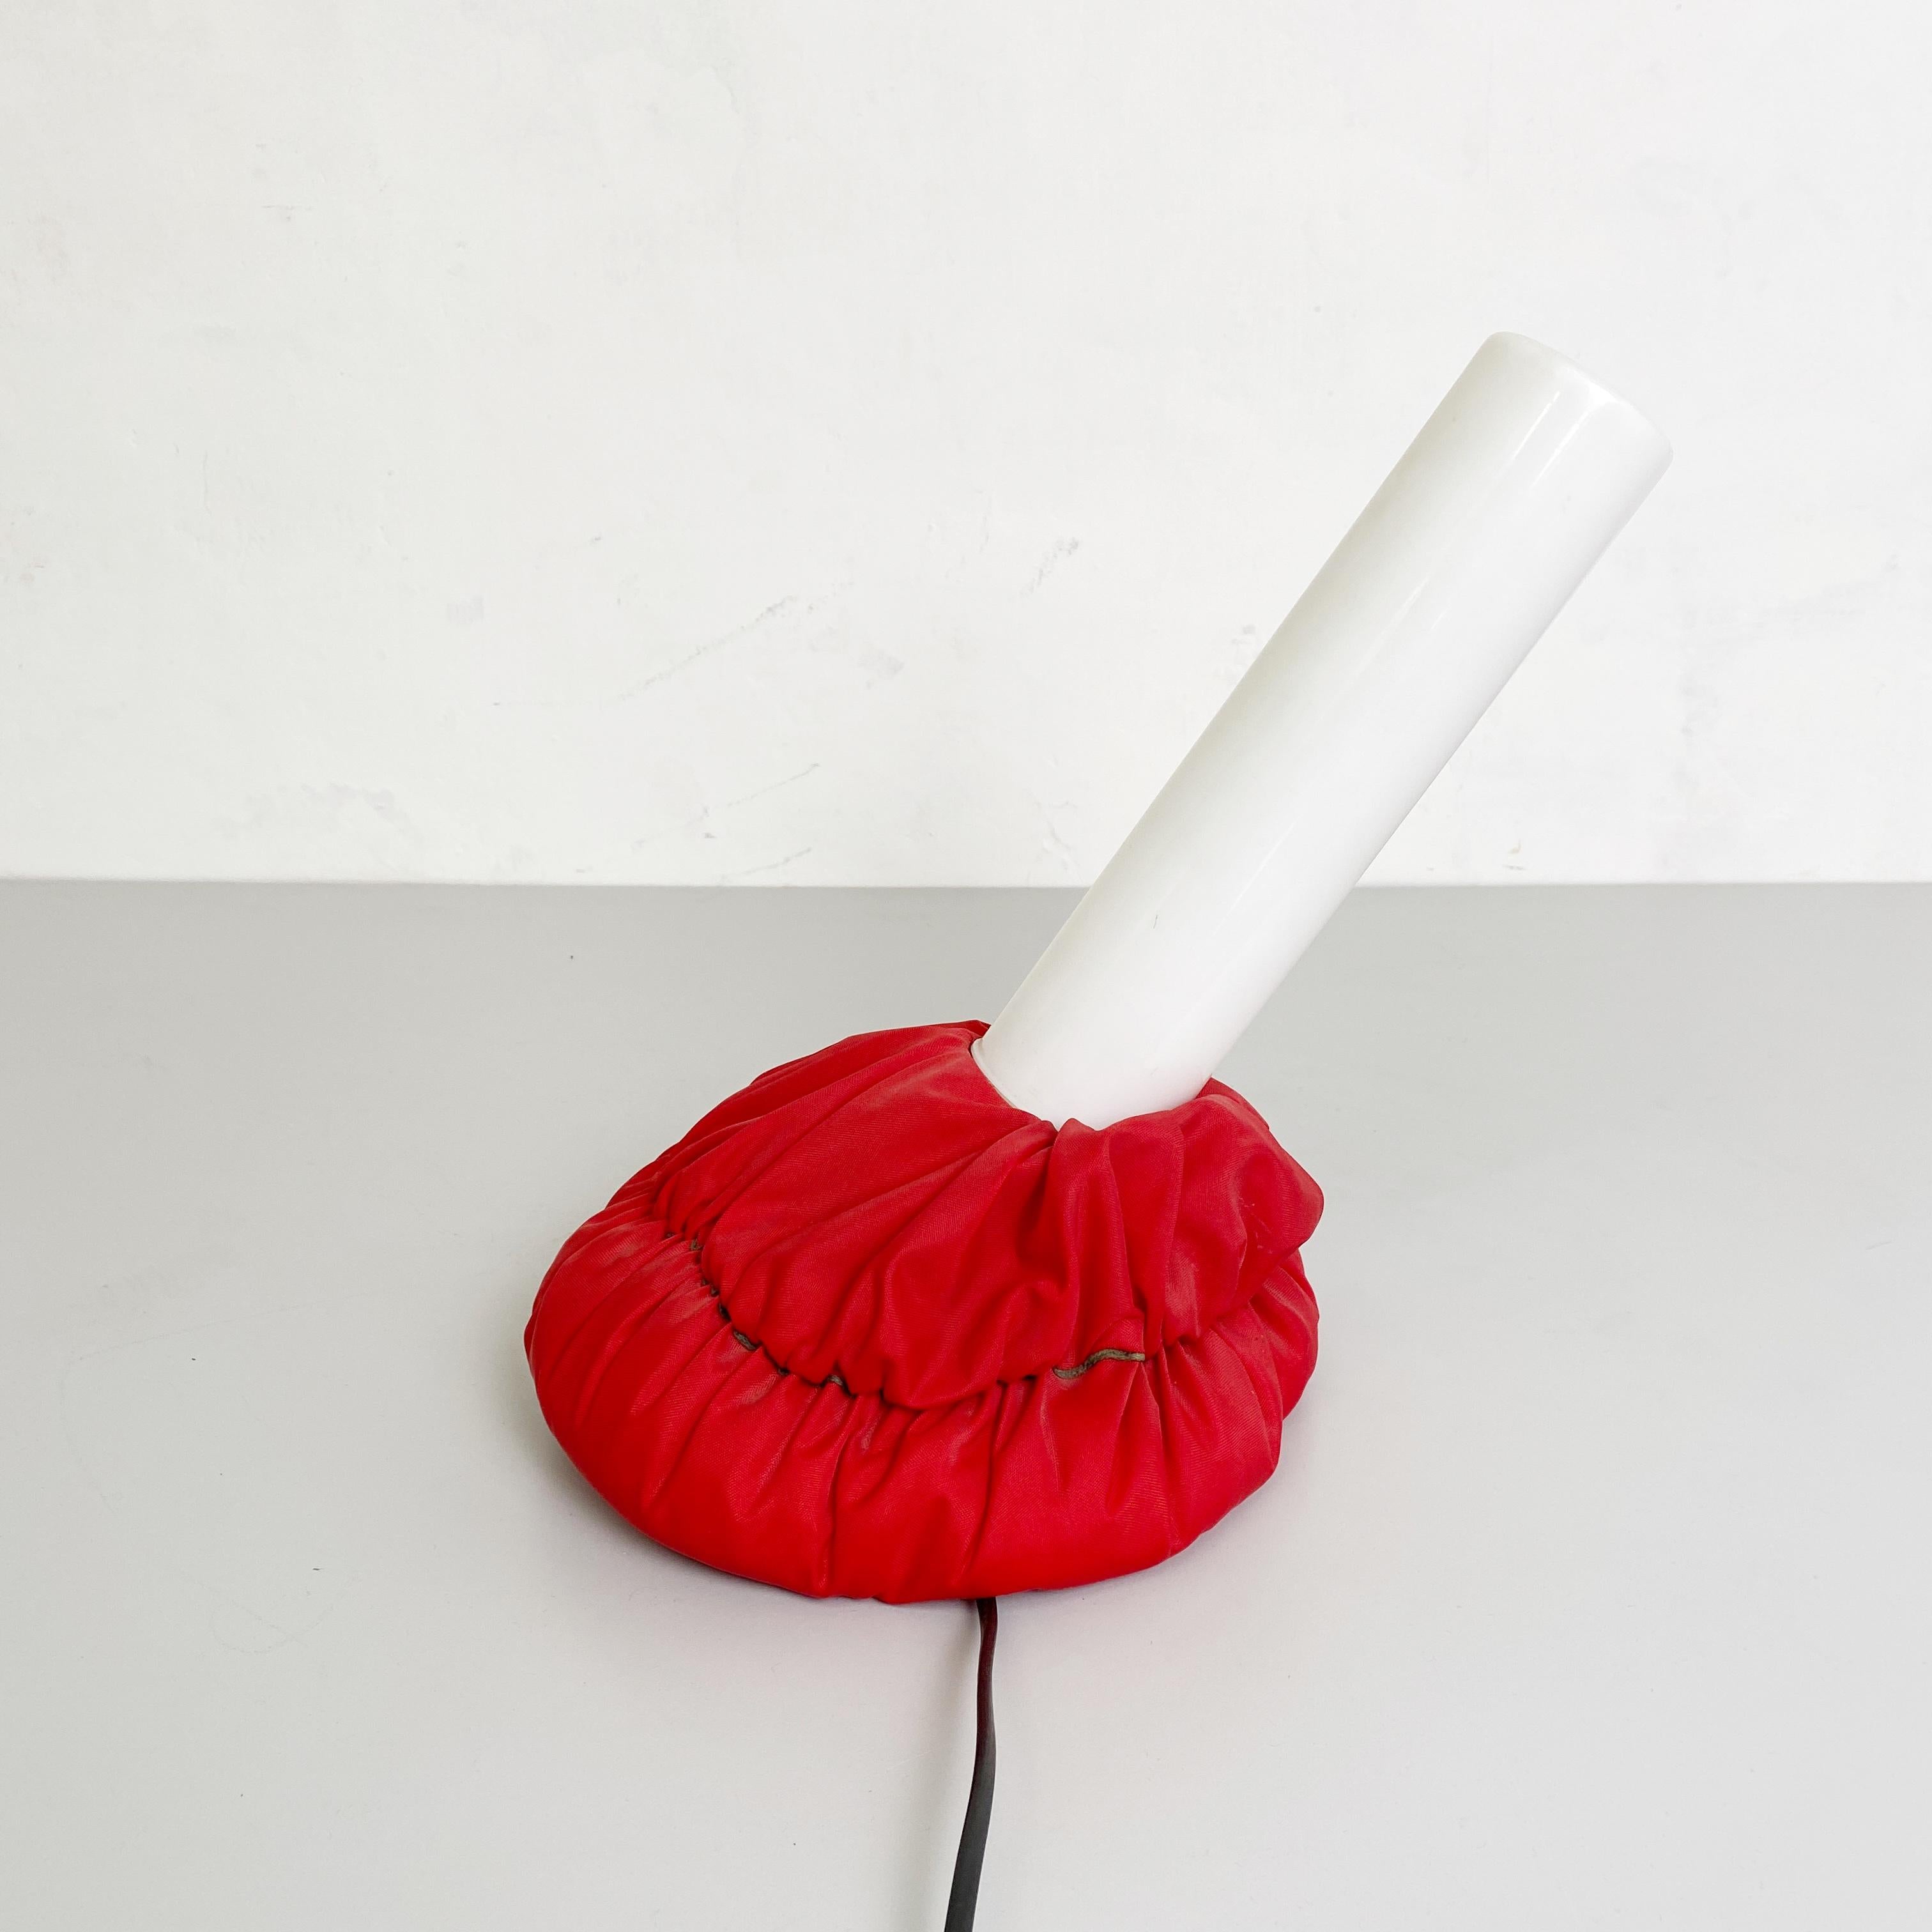 Italian Table Lamp Mod. Cloche by De Pas, D'urbino and Lomazzi for Sirrah, 1982 For Sale 2